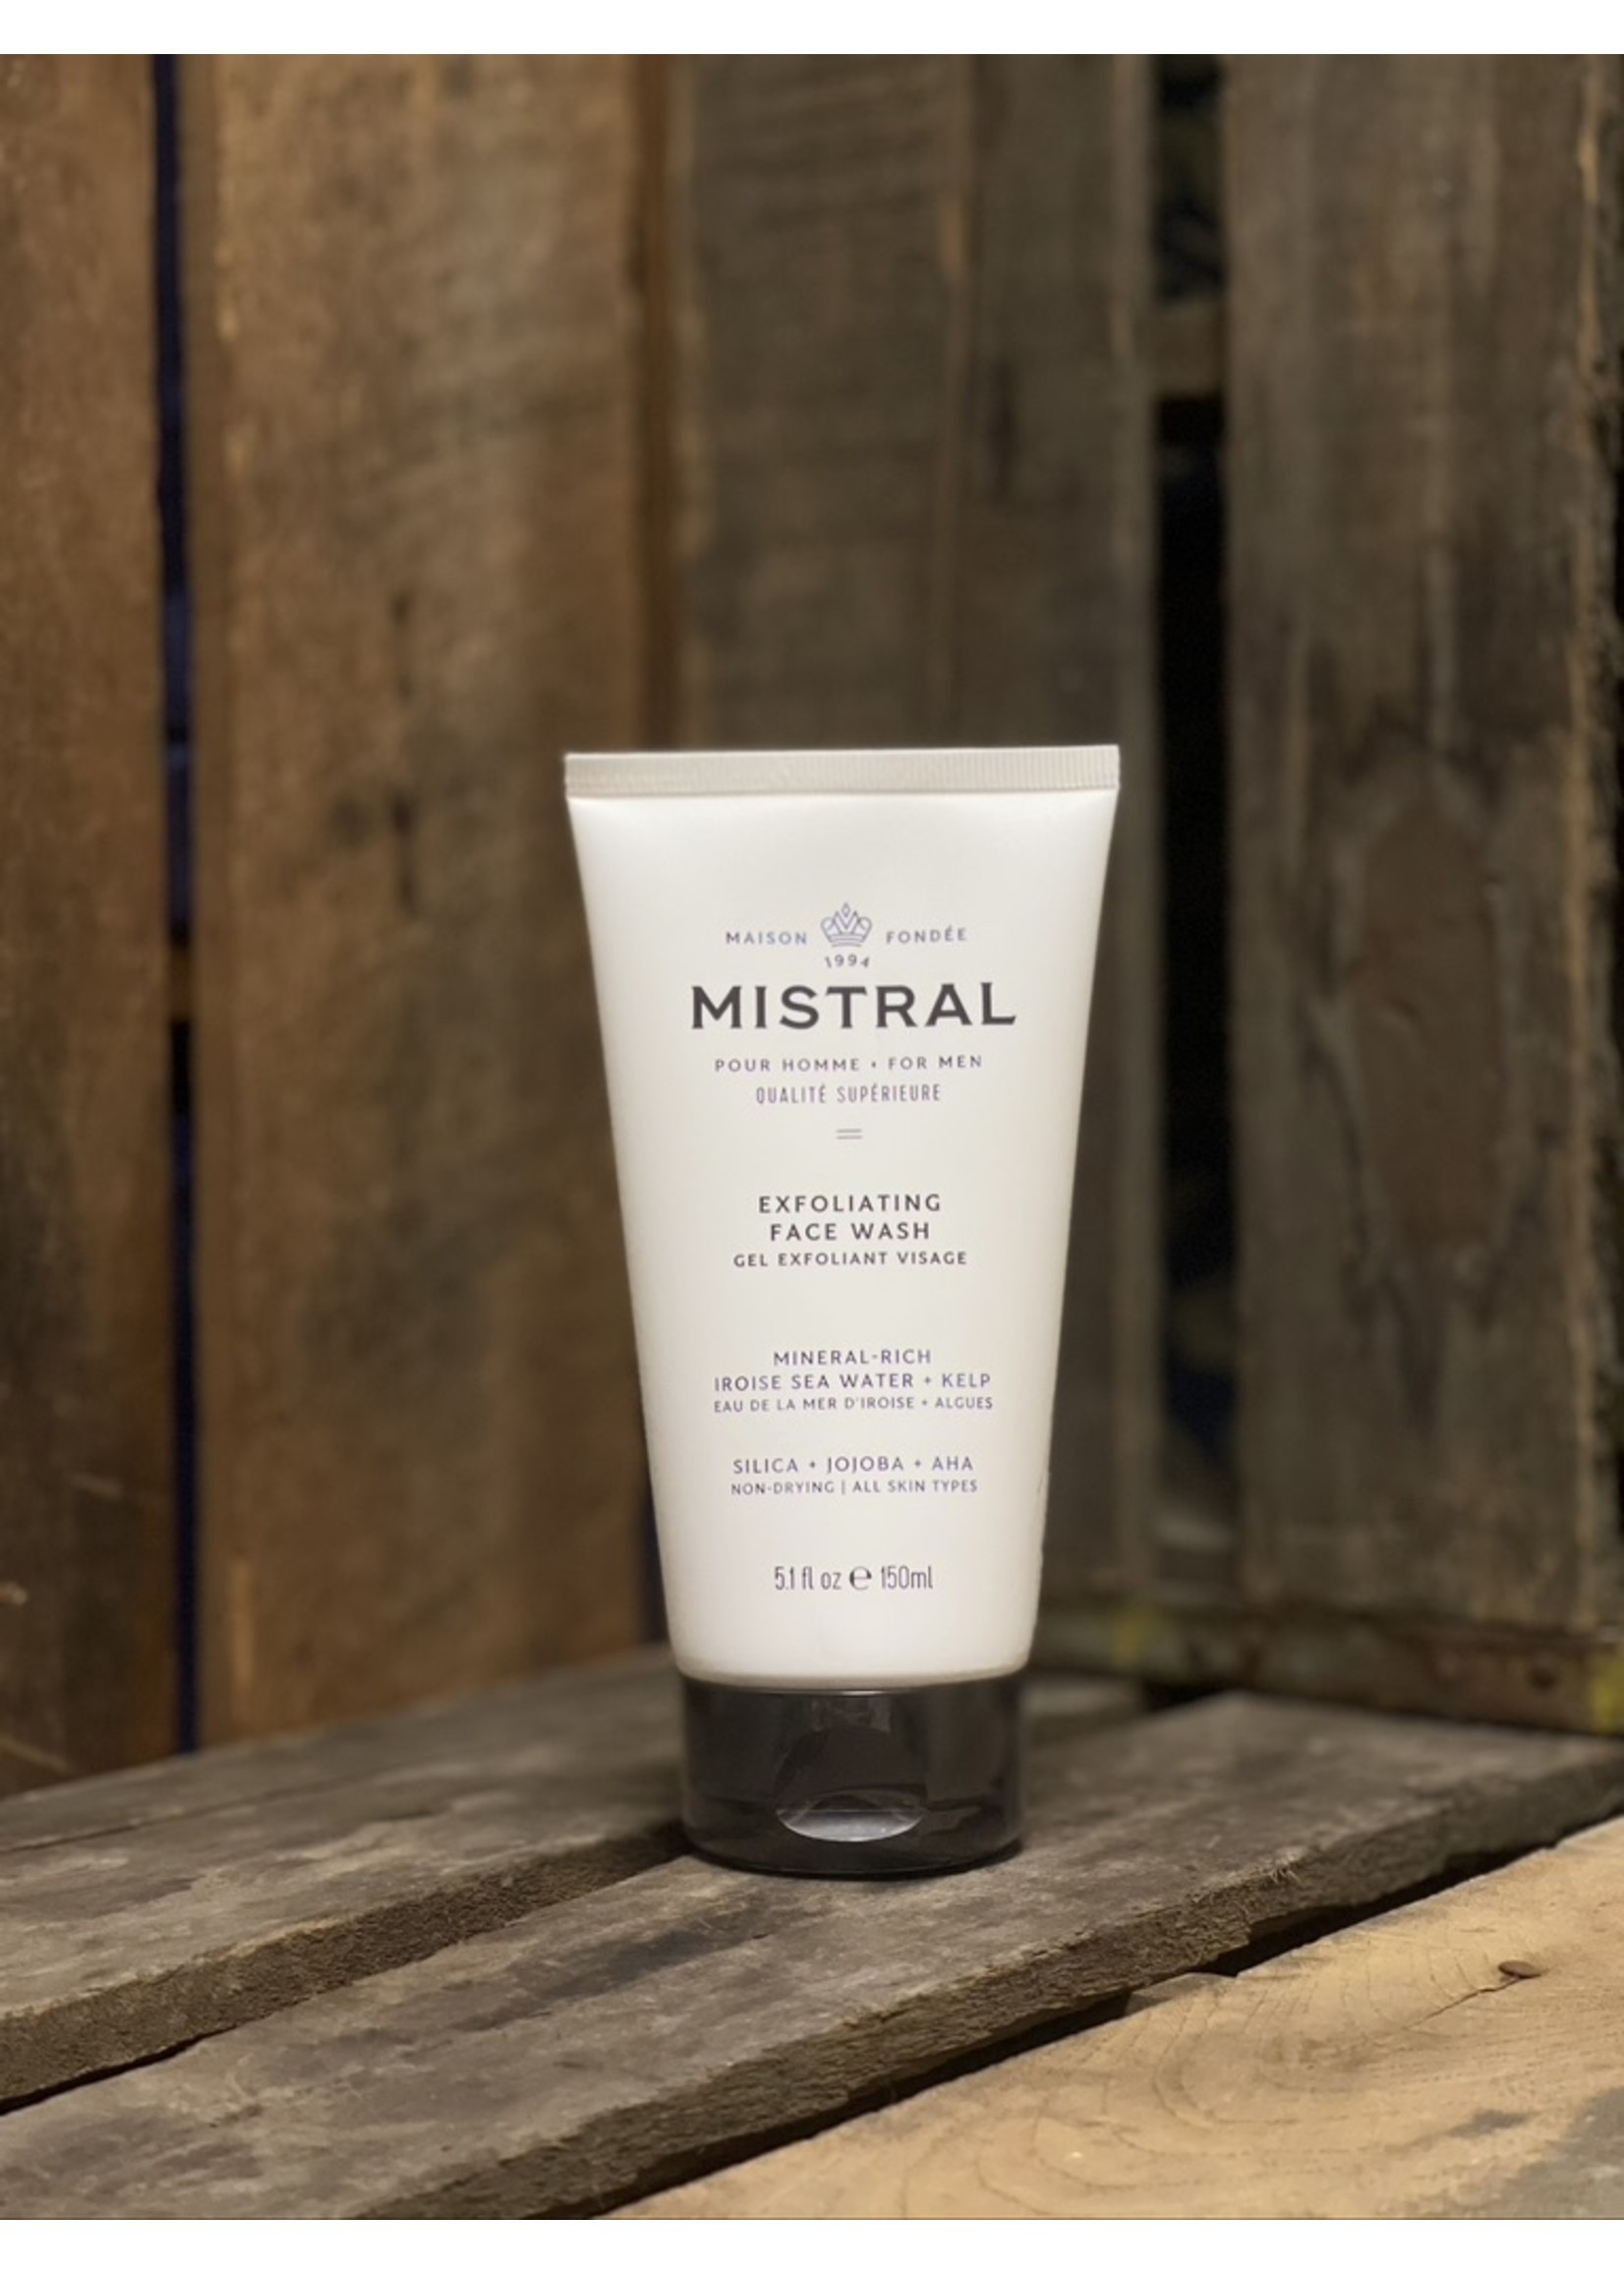 Mistral Iroise Sea Water Exfoliating Face Wash